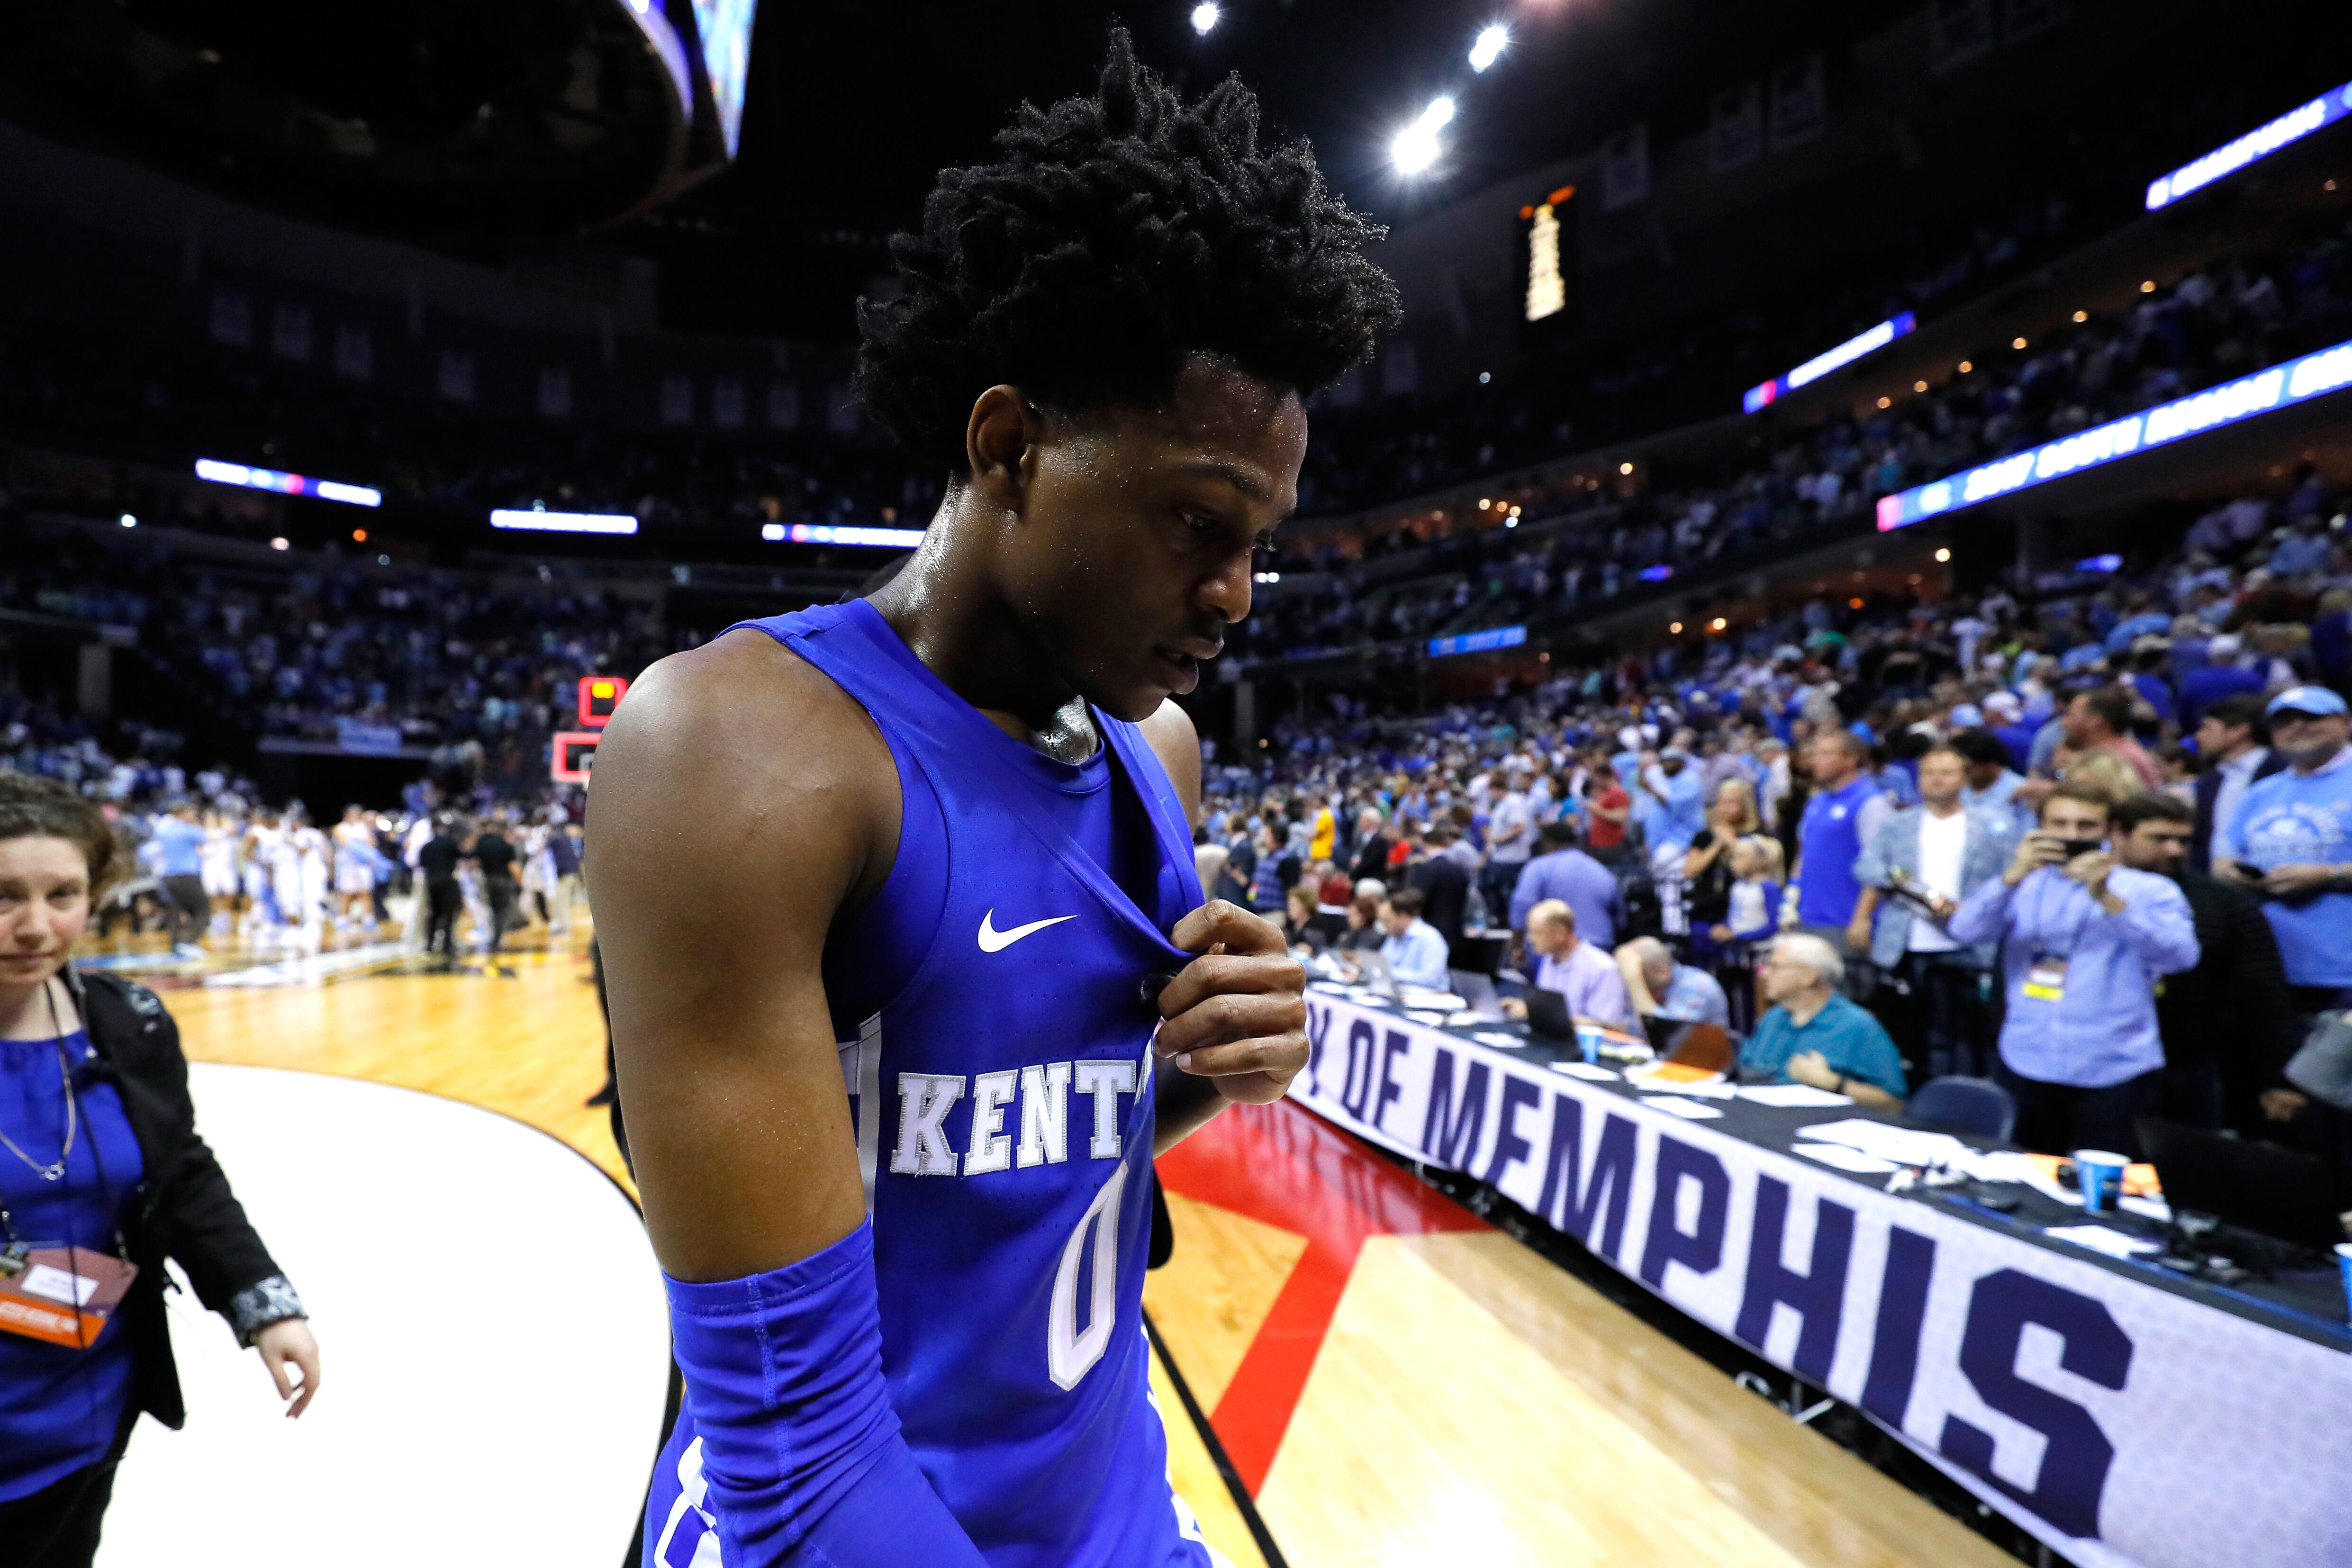 MEMPHIS, TN - MARCH 26: De'Aaron Fox #0 of the Kentucky Wildcats walks off the court after being defeated by the North Carolina Tar Heels during the 2017 NCAA Men's Basketball Tournament South Regional at FedExForum on March 26, 2017 in Memphis, Tennessee